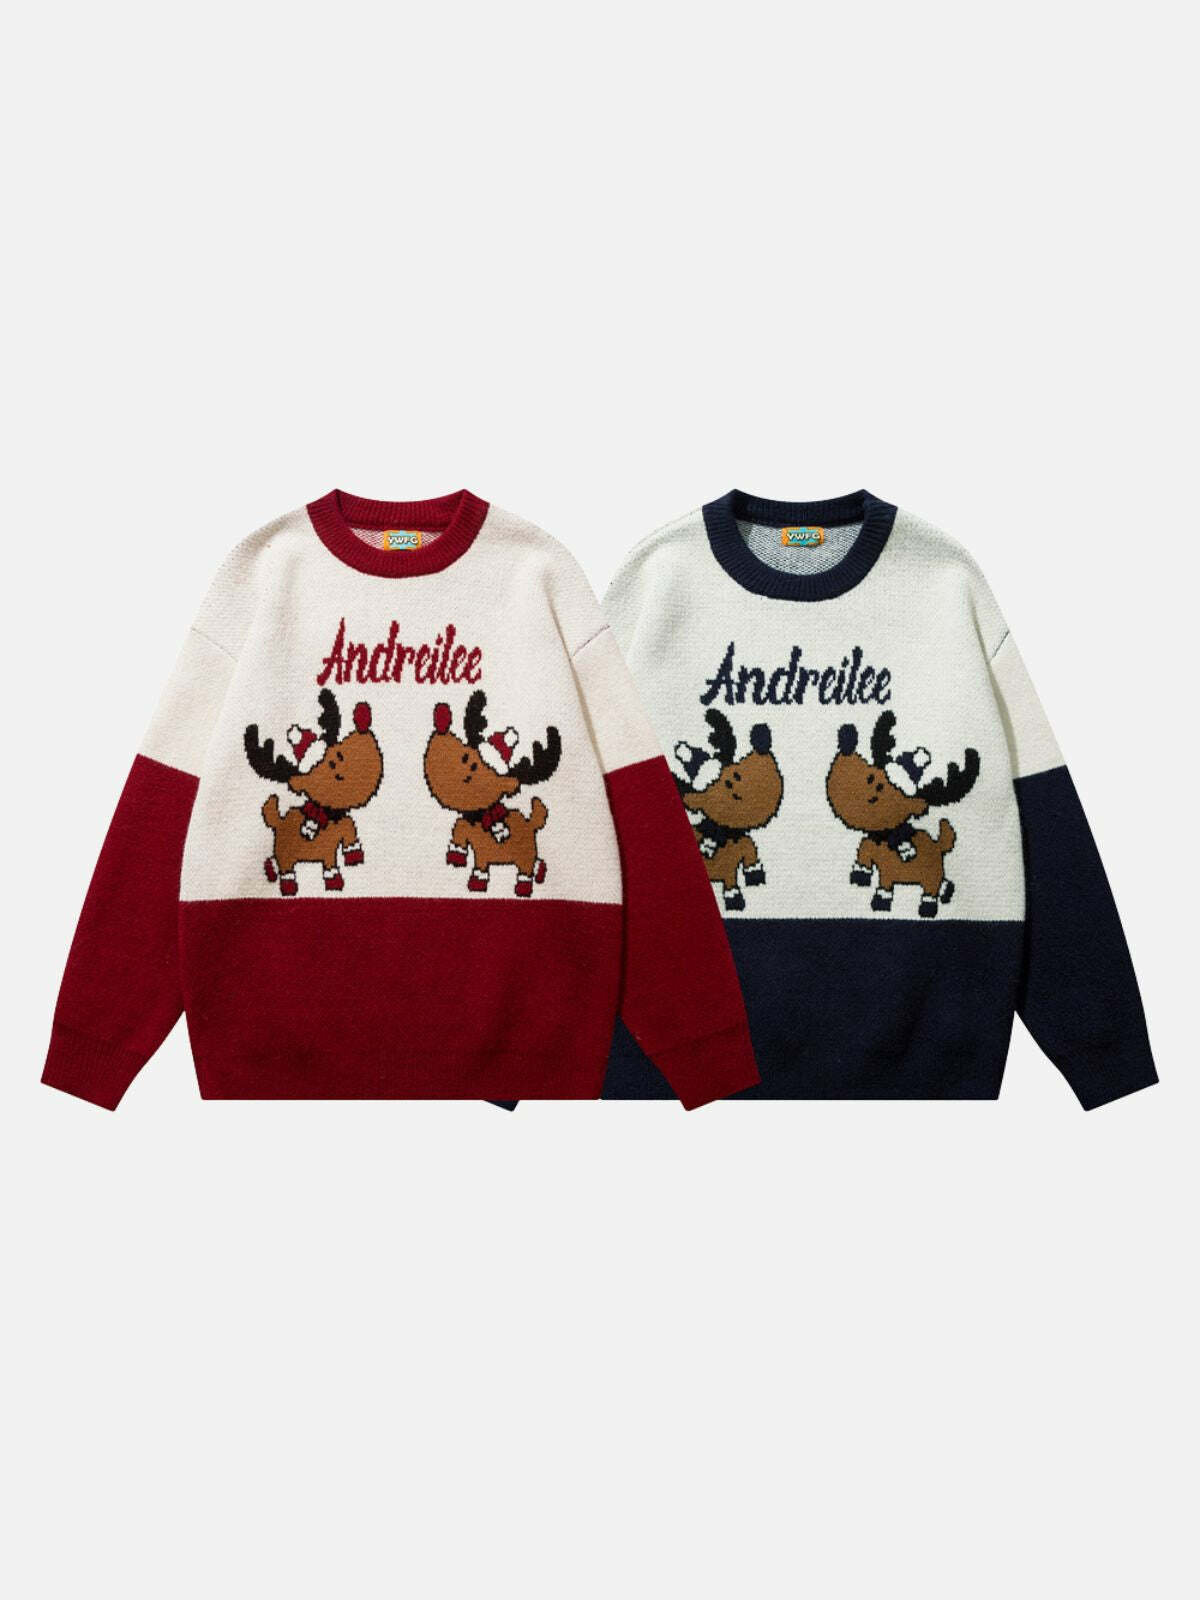 festive deer graphic sweater vibrant holiday fashion 5635